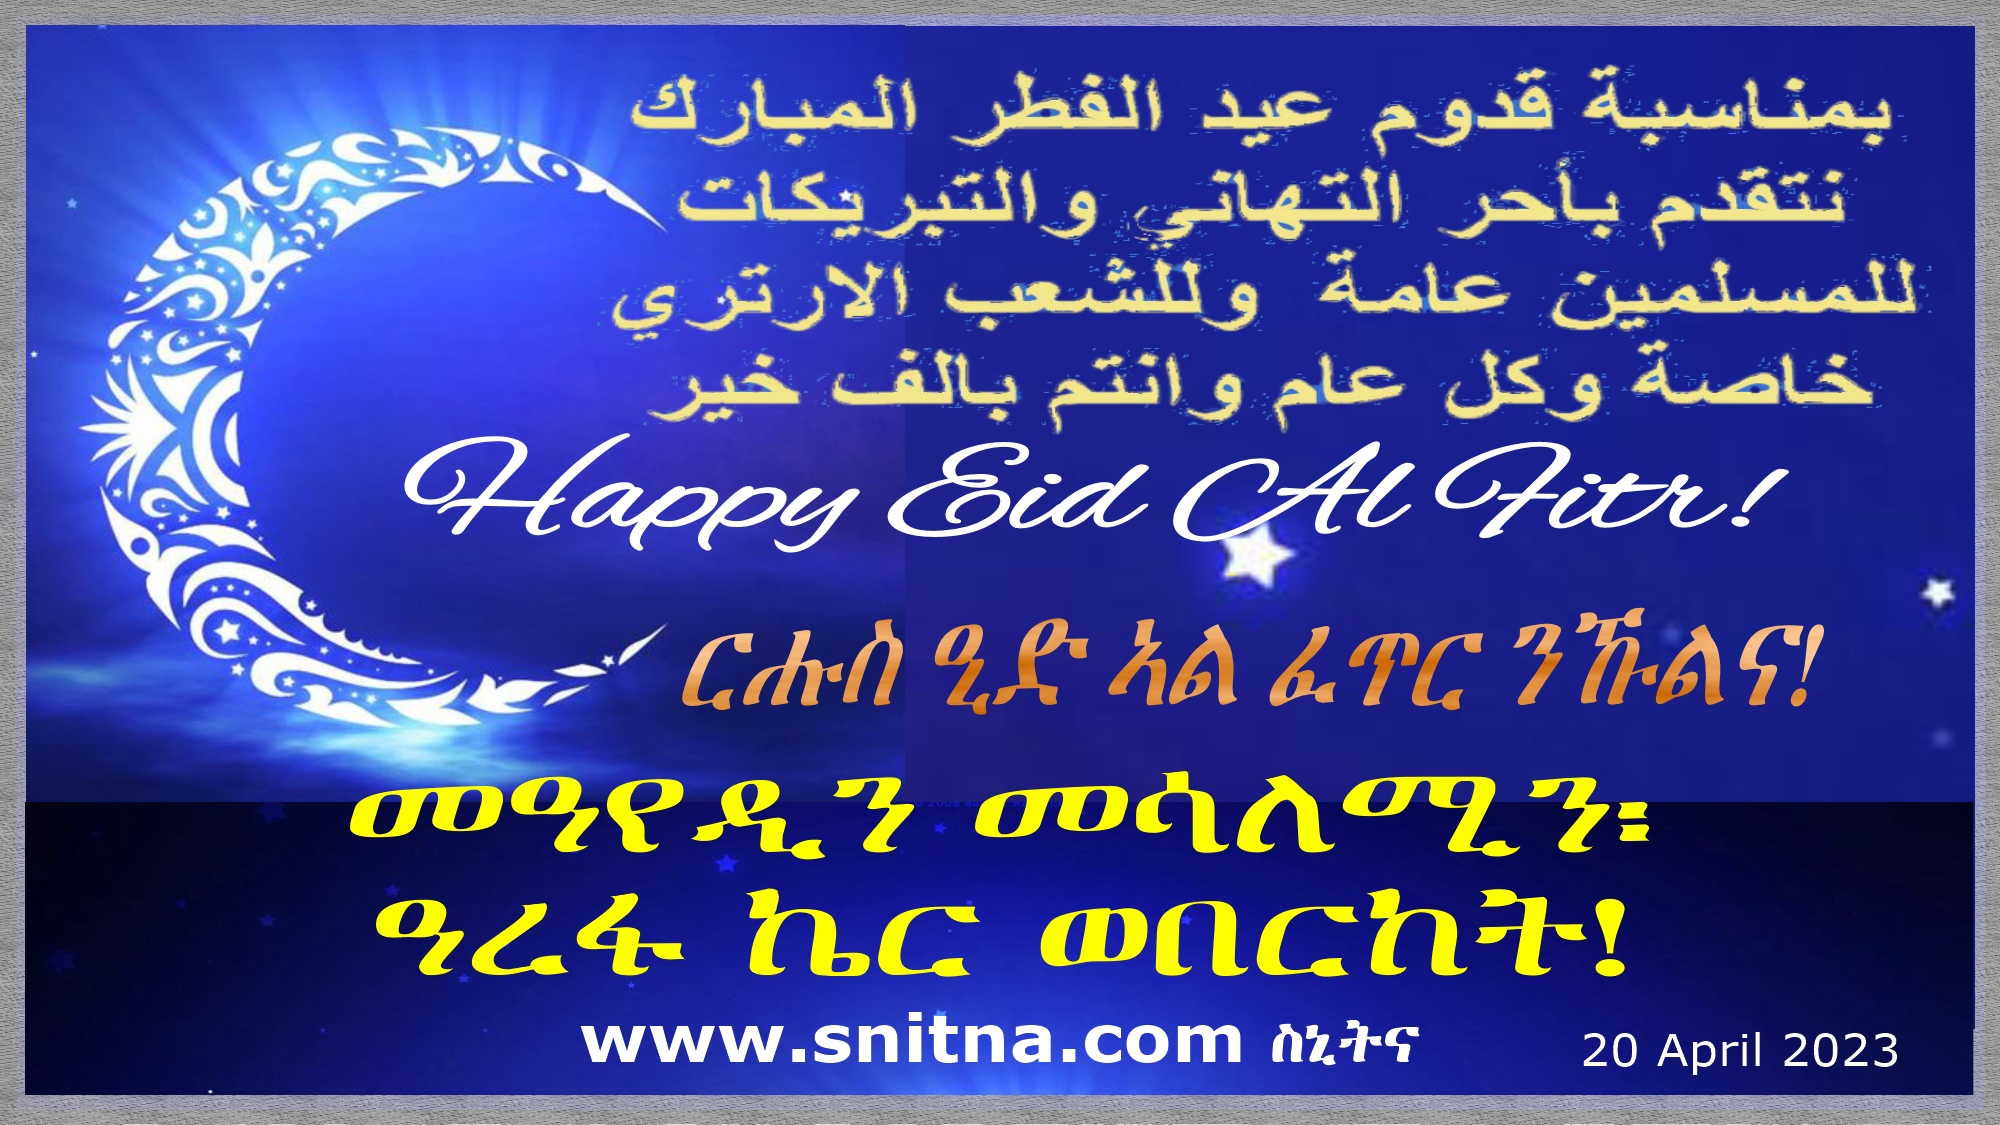 Happy Eid Al Fitr 2023, to All! from snitna.com.